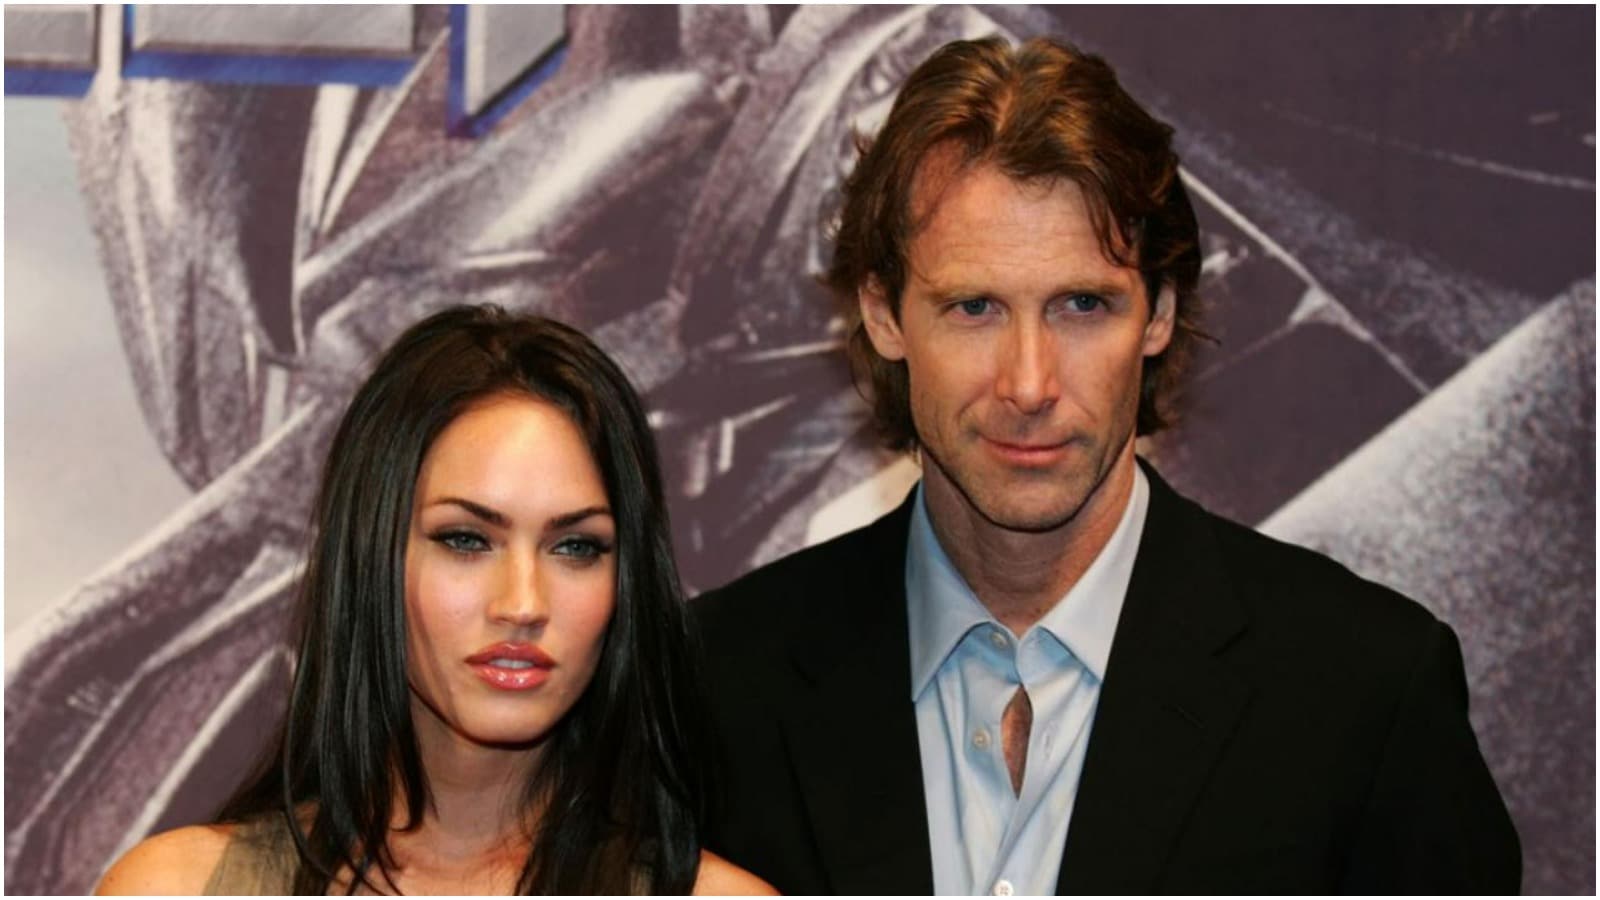 Megan Fox and Micheal Bay from the promotions of Transformers.